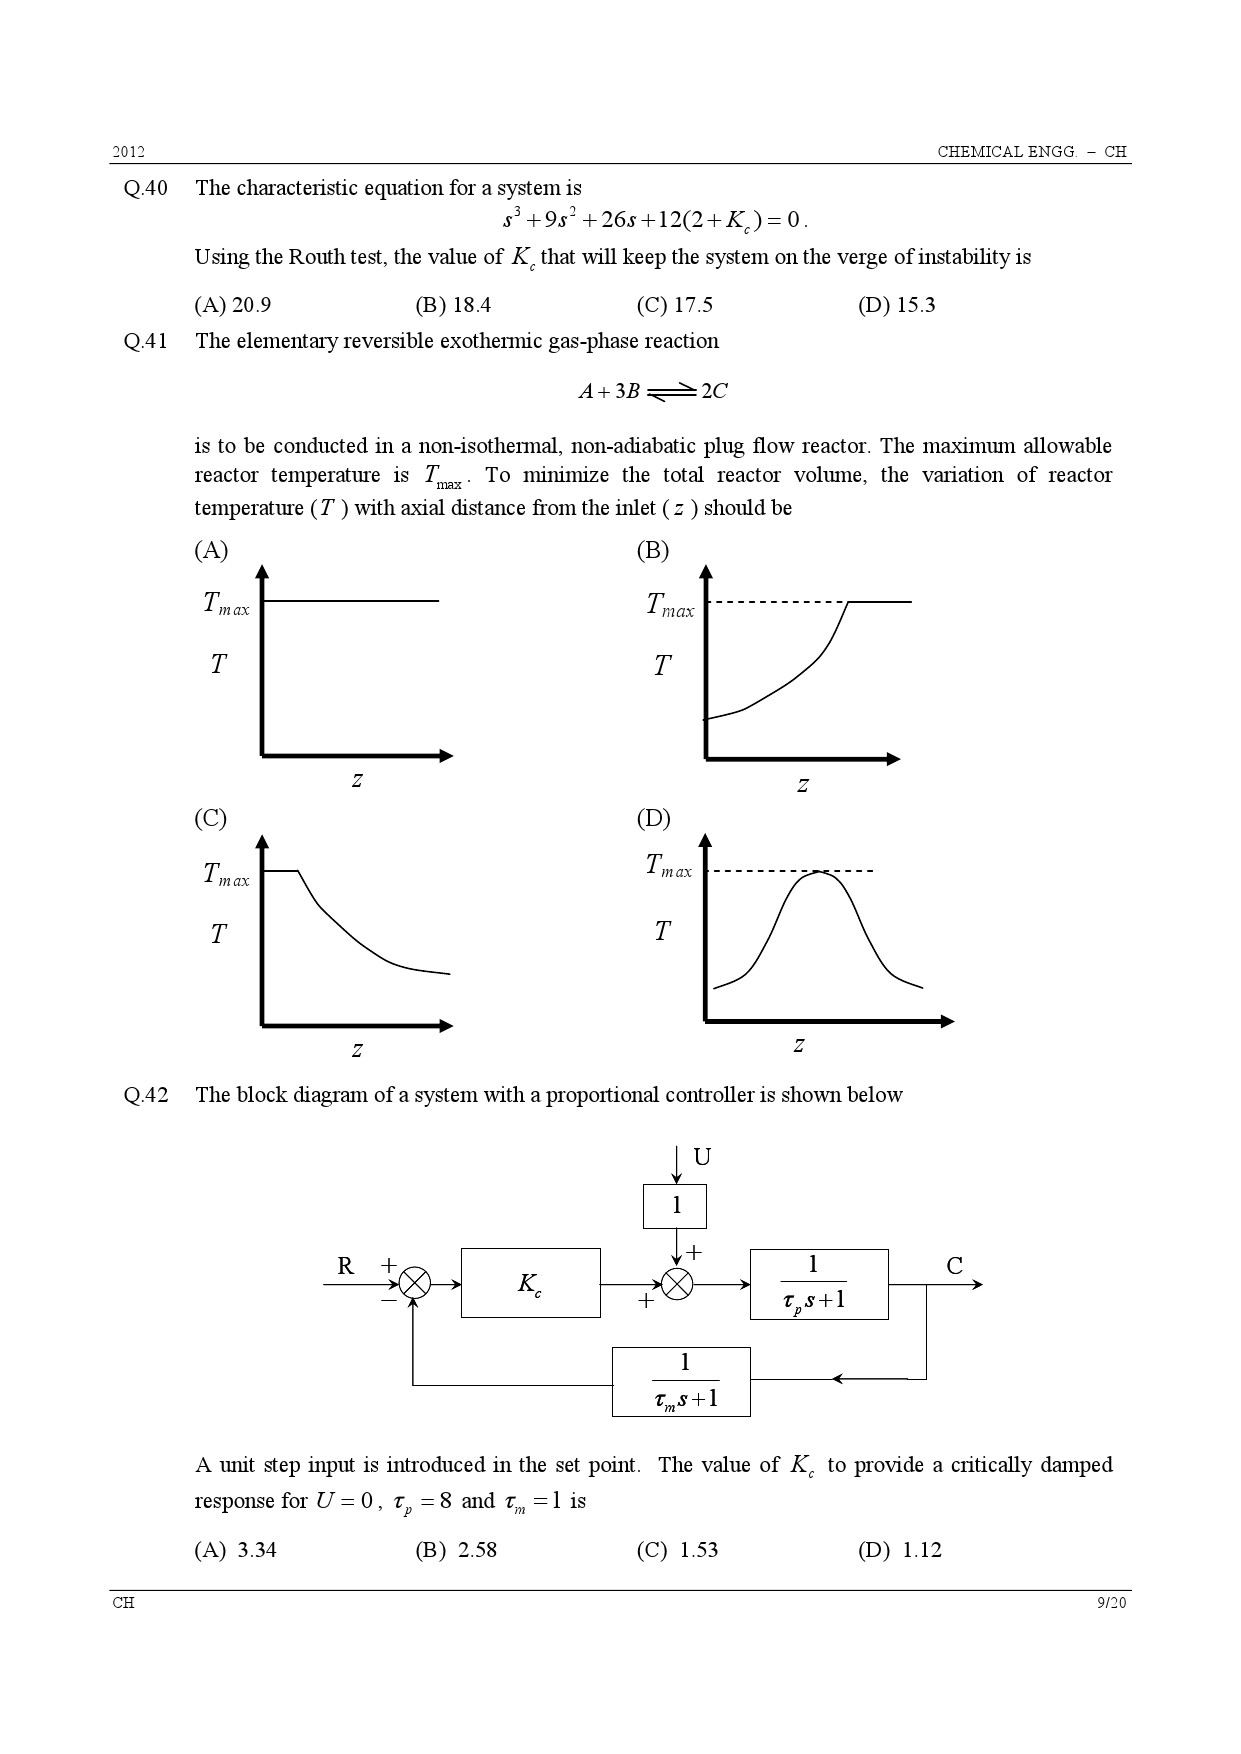 GATE Exam Question Paper 2012 Chemical Engineering 9